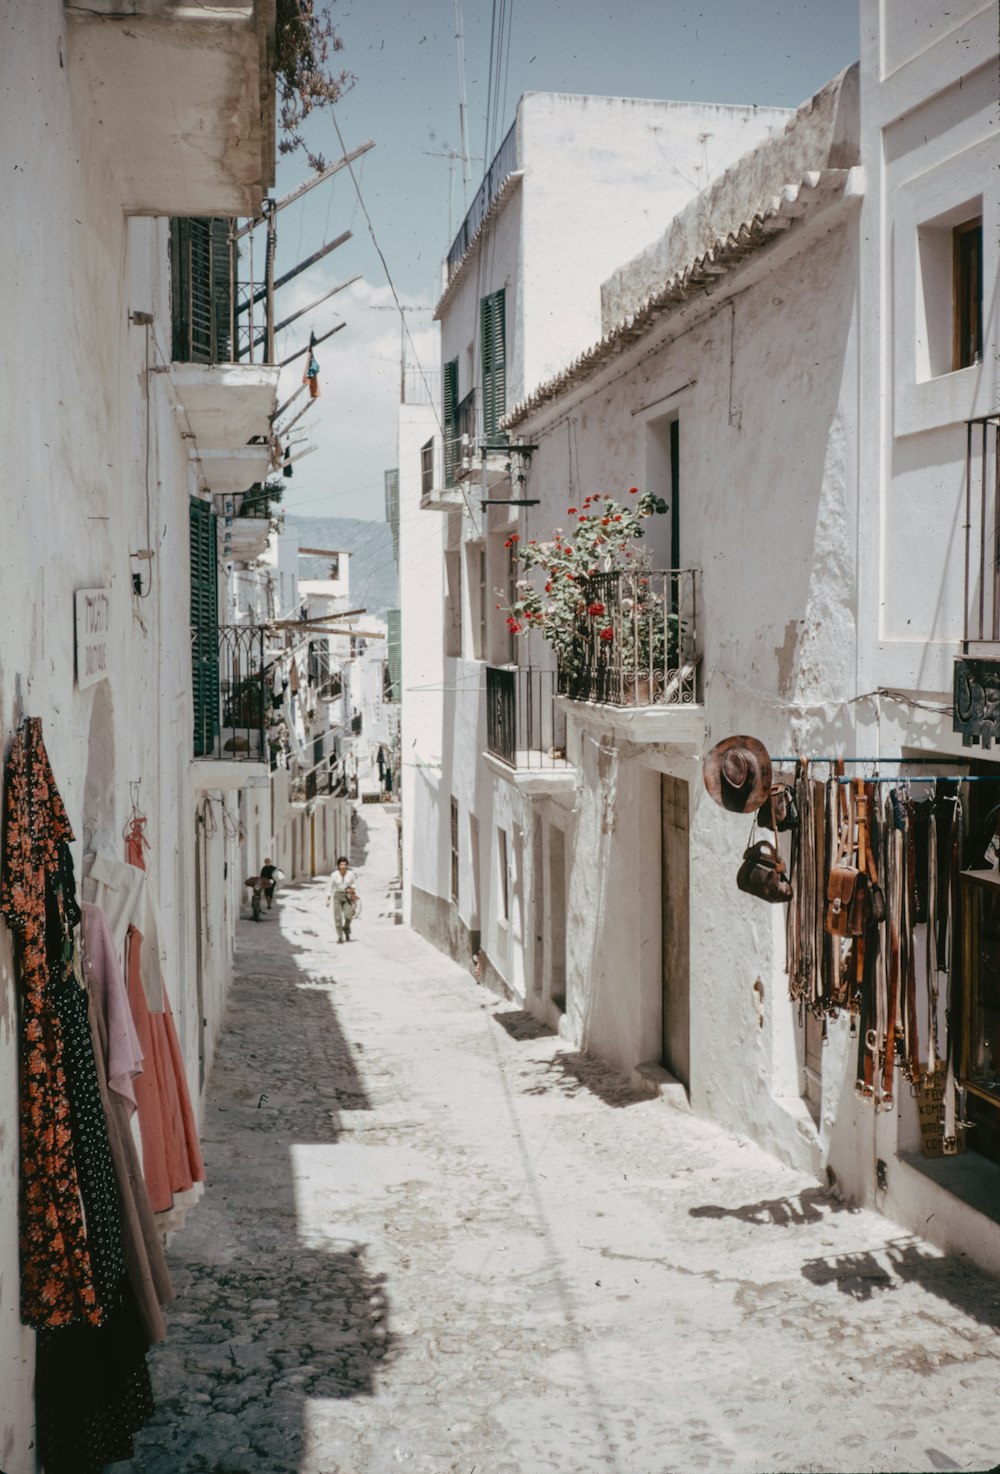 a narrow street with clothes hanging out to dry